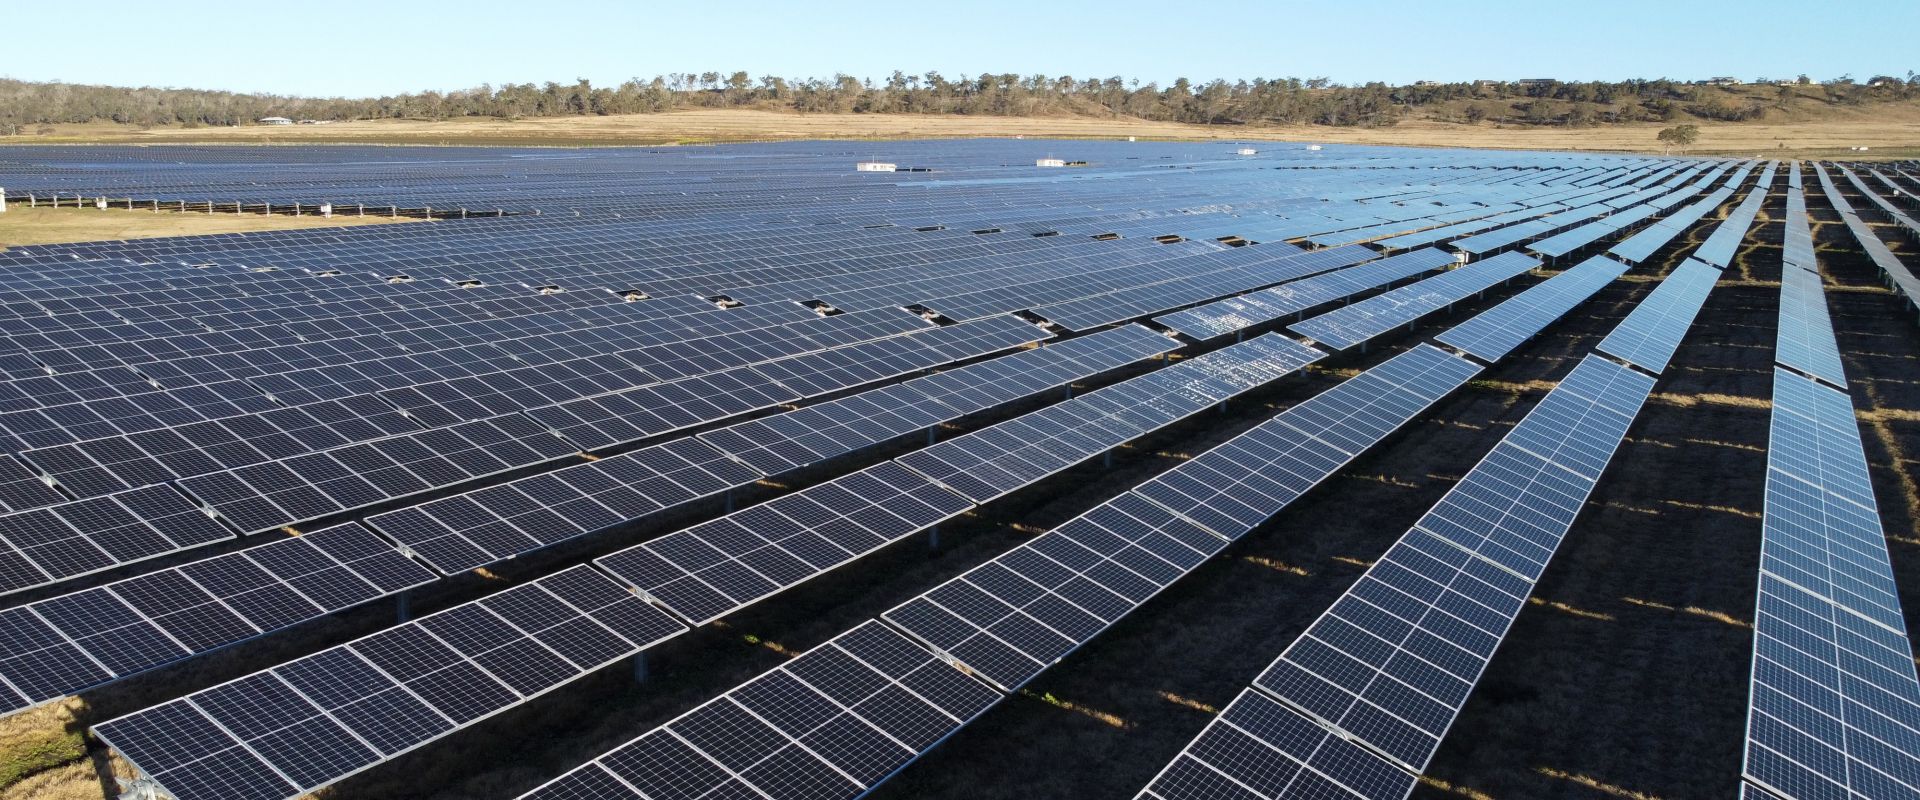 An array of rows of solar panels in a solar panel farm in front of trees.